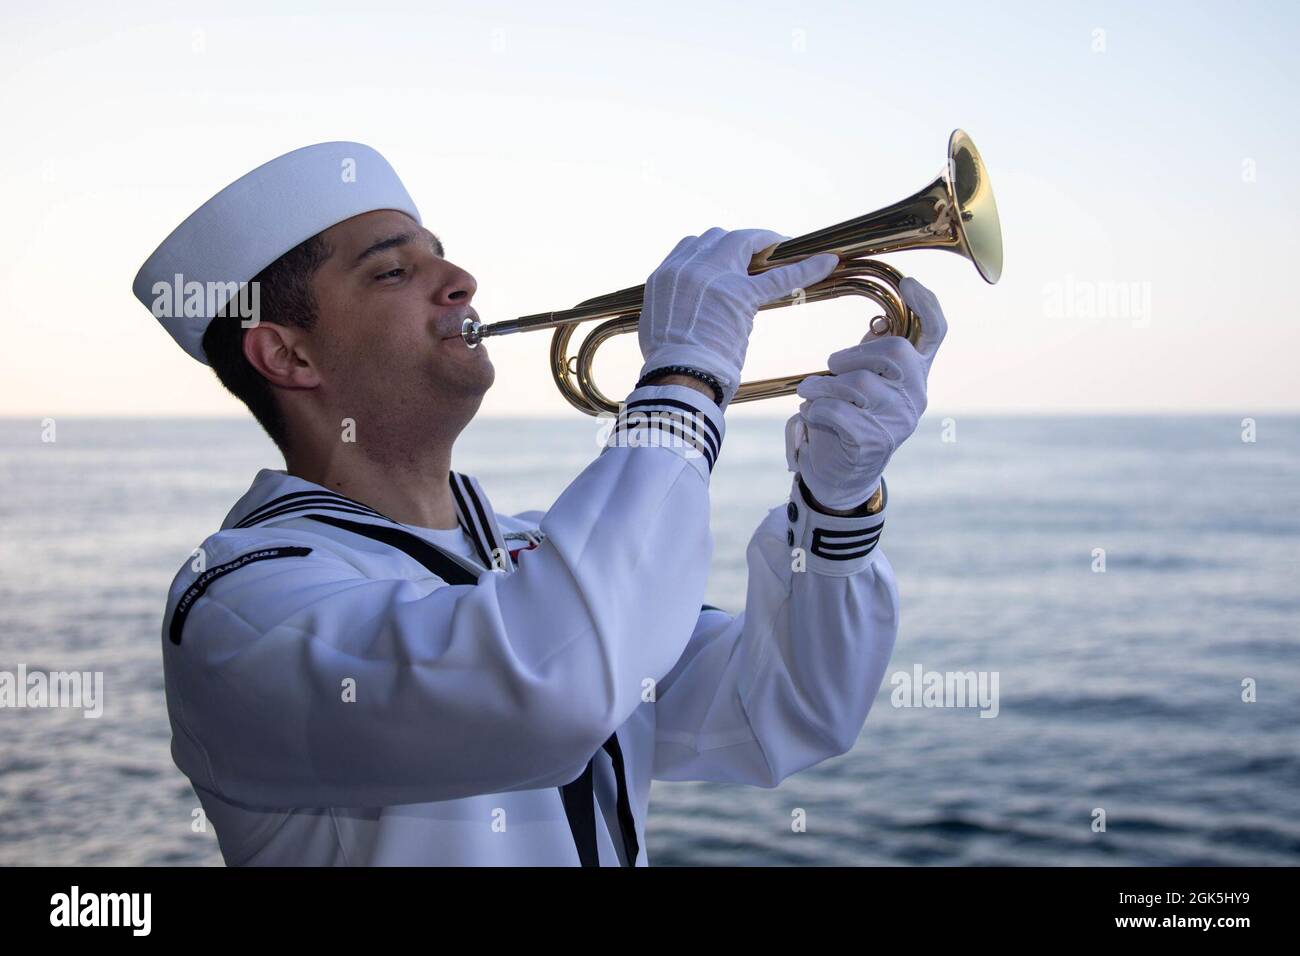 210808-N-EG940-3351 ATLANTIC OCEAN (Aug. 8, 2021) Aviation Boatswain's Mate (Fuel) 3rd Class Luis Marcano plays Taps during a burial at sea aboard the Wasp-class amphibious assault ship USS Kearsarge (LHD 3) Aug. 8, 2021. Kearsarge is underway to support Large-Scale Exercise (LSE) 2021. LSE 2021 demonstrates the Navy's ability to employ precise, lethal, and overwhelming force globally across three naval component commands, five numbered fleets, and 17 time zones. LSE 2021 merges live and synthetic training capabilities to create an intense, robust training environment. It will connect high-fid Stock Photo